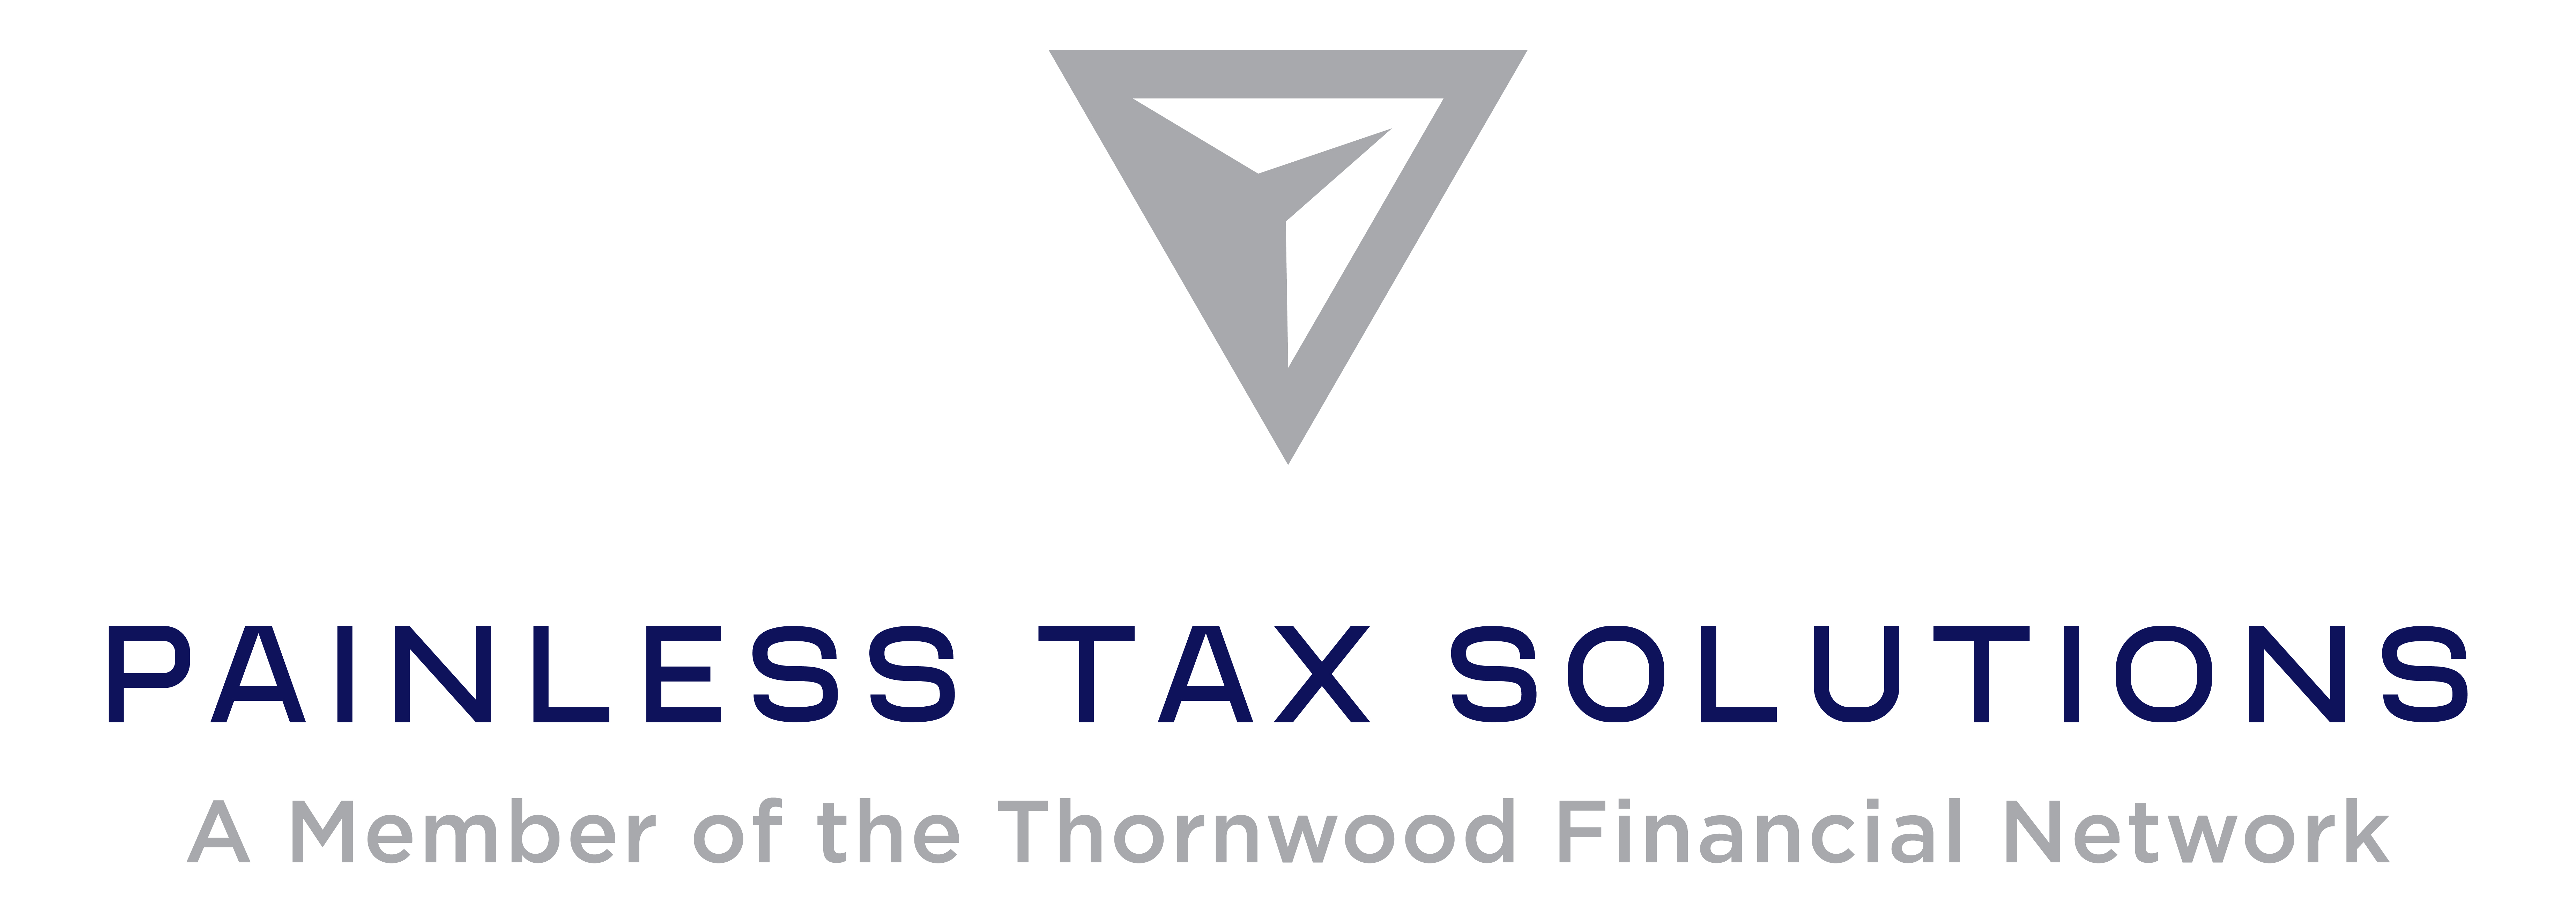 PAINLESS TAX SOLUTIONS